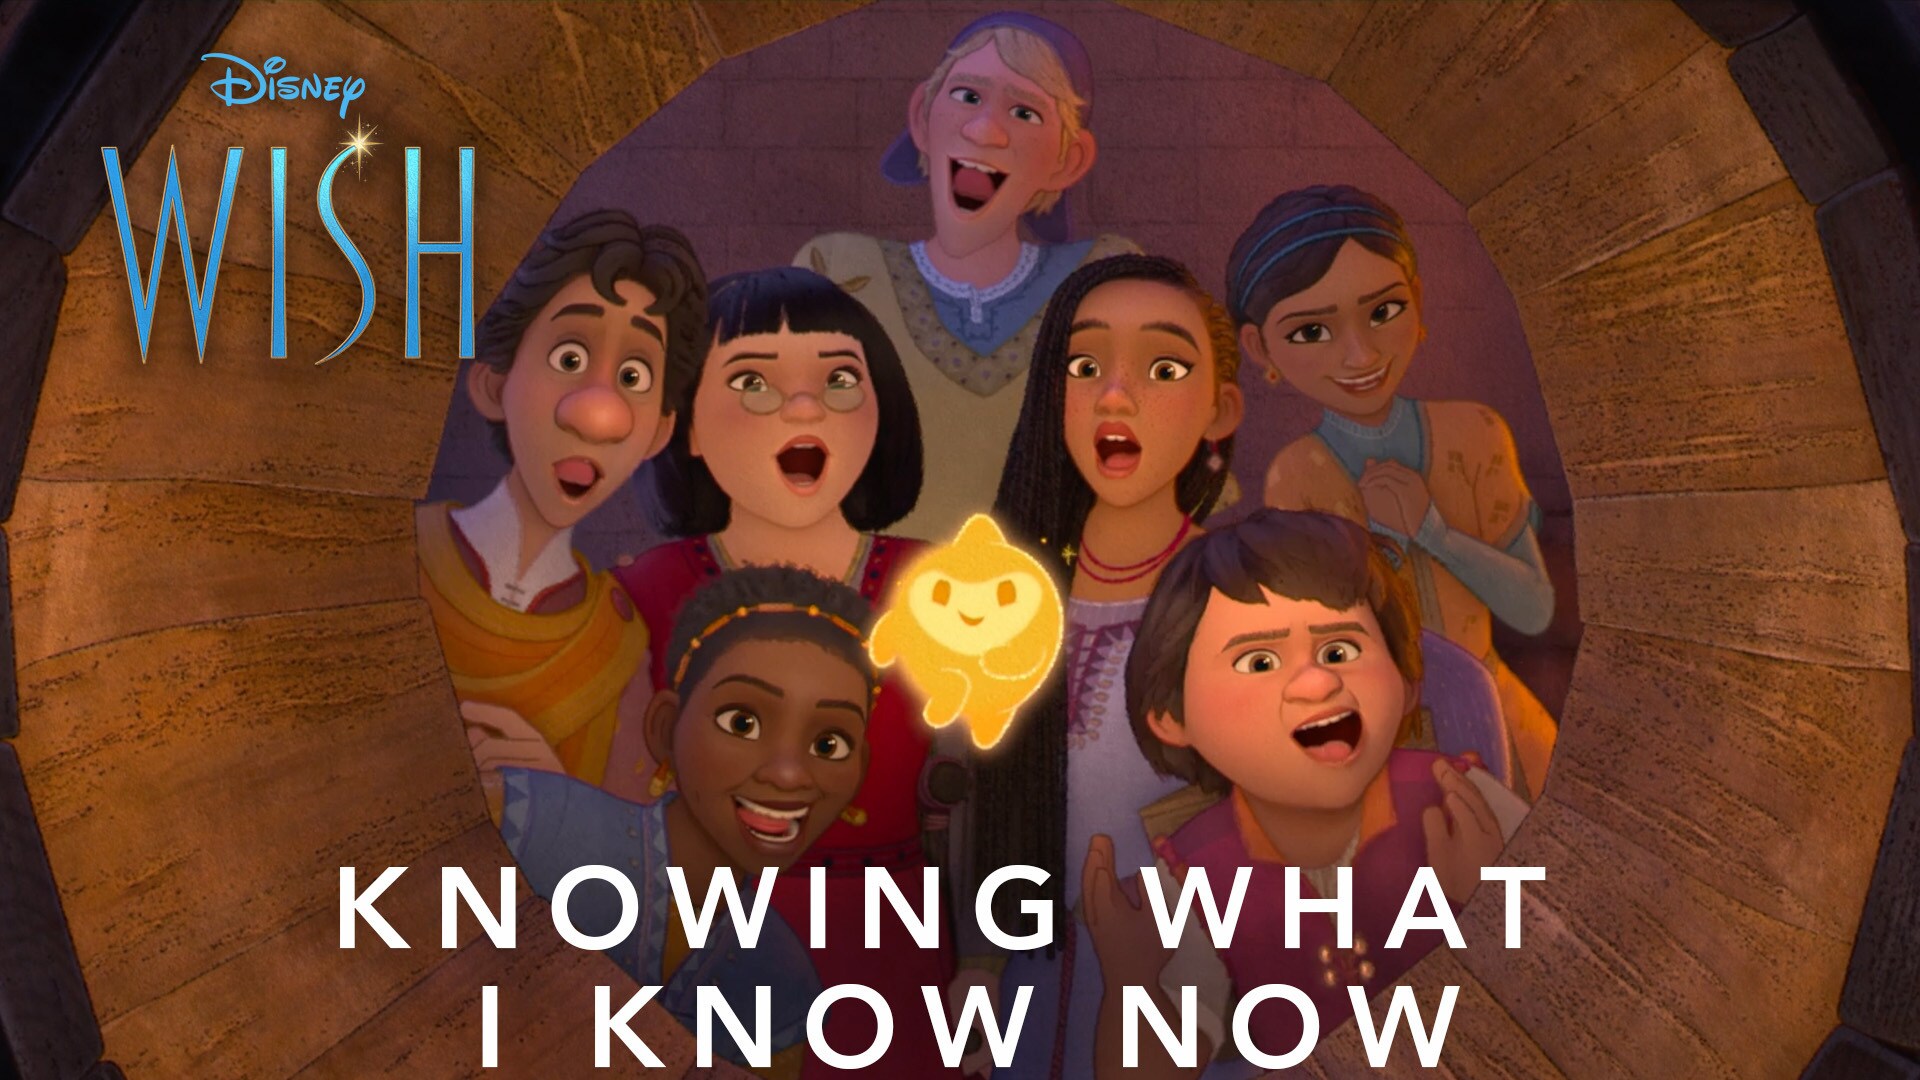 Disney's Wish | "Knowing What I Know Now"